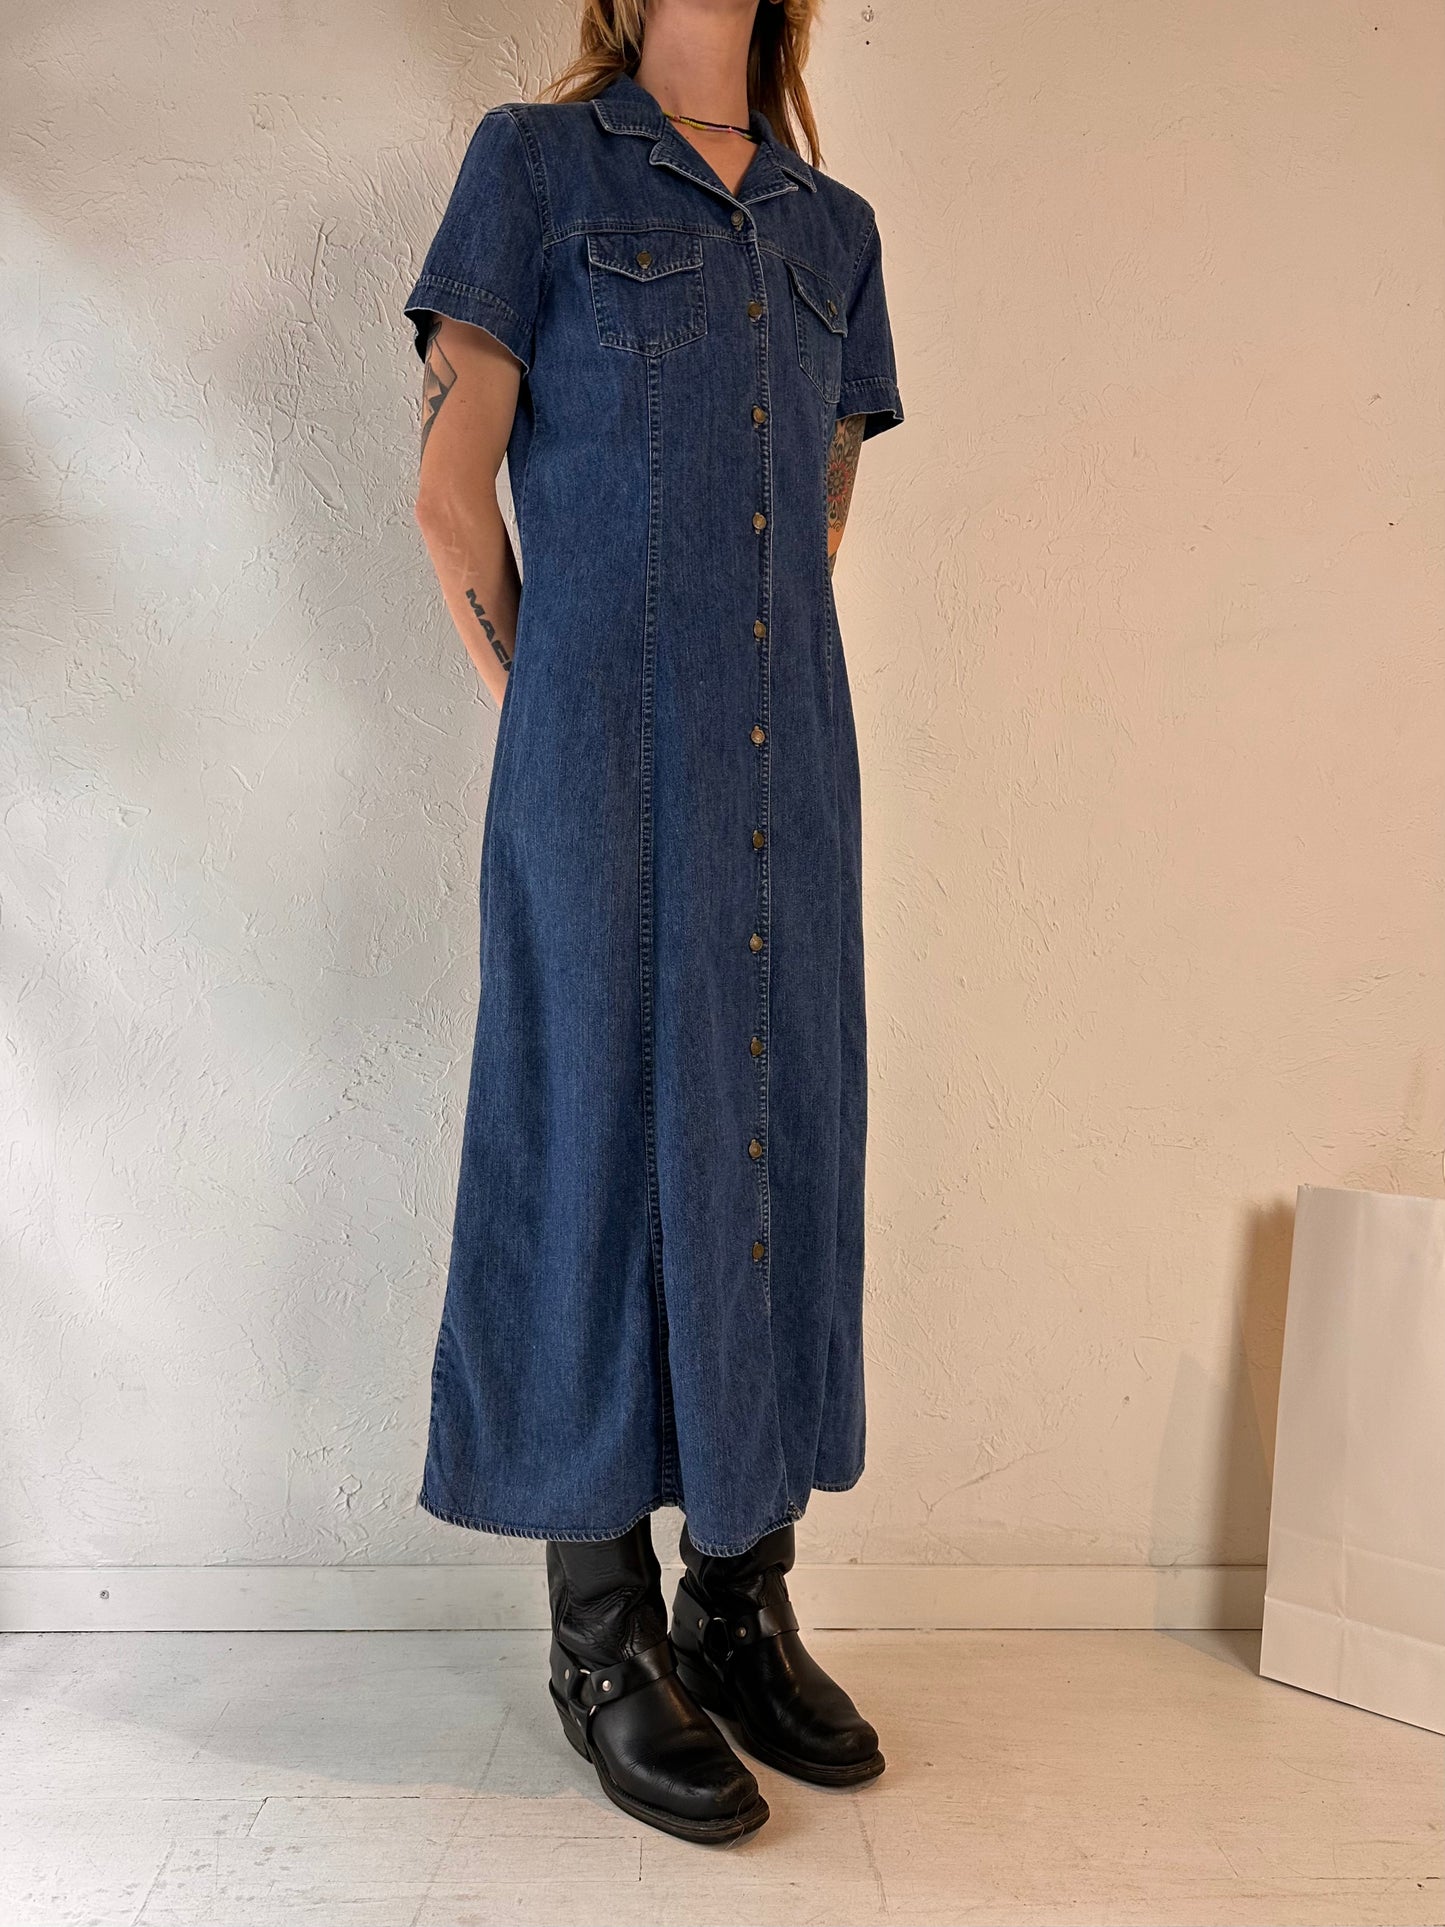 90s Button Up Embroidered Denim Dress / Small